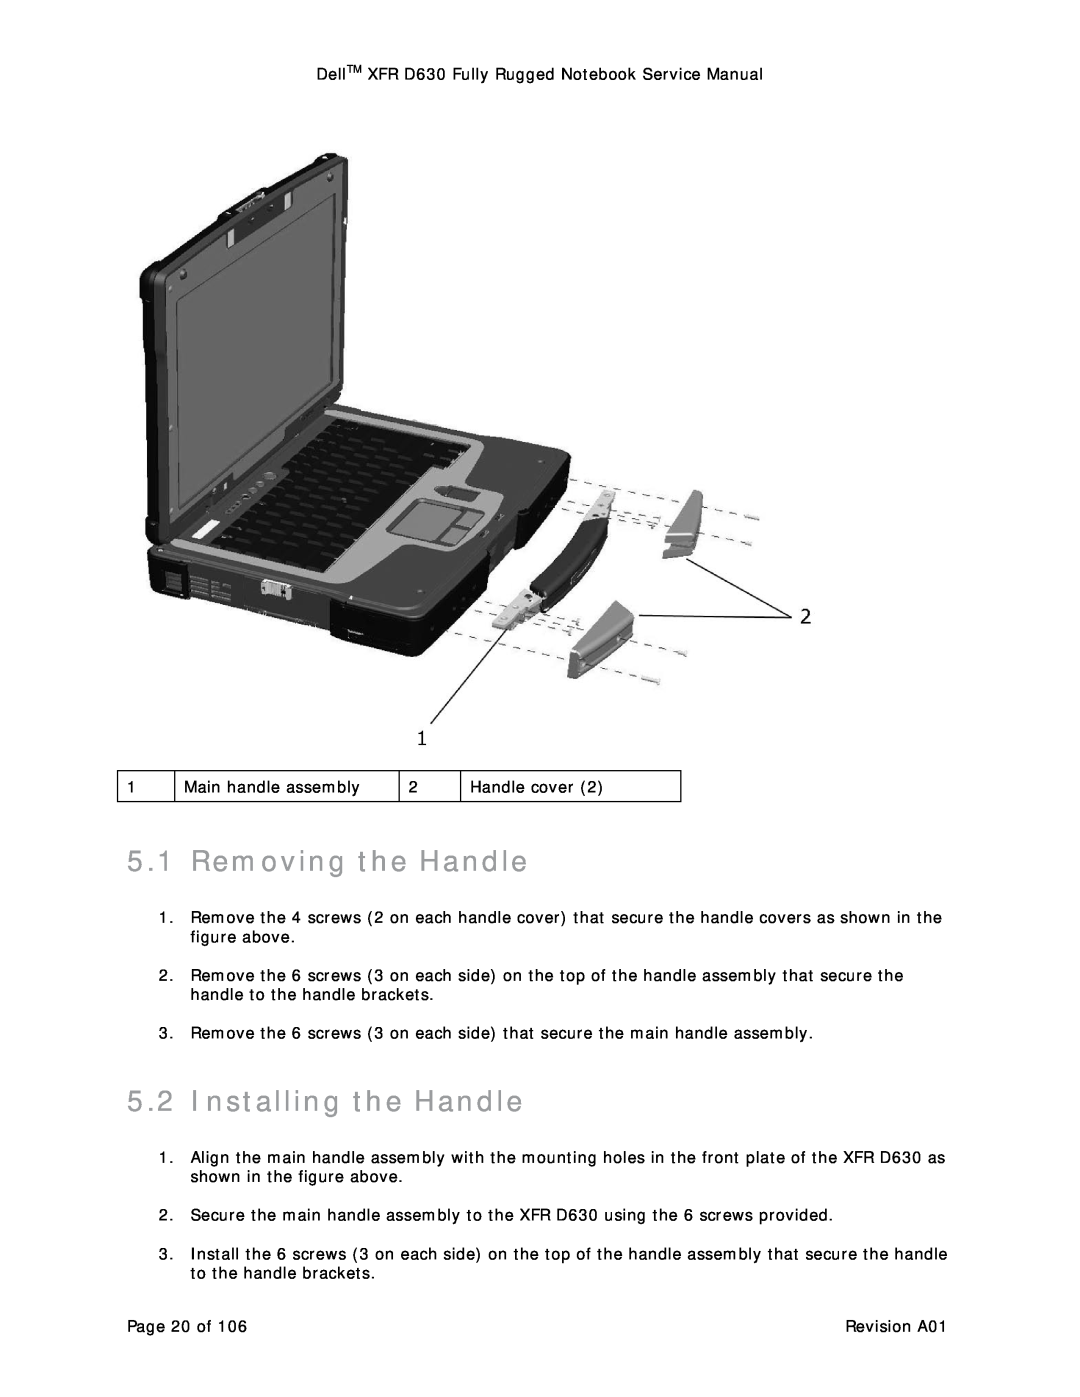 Dell D630 service manual Removing the Handle, Installing the Handle 